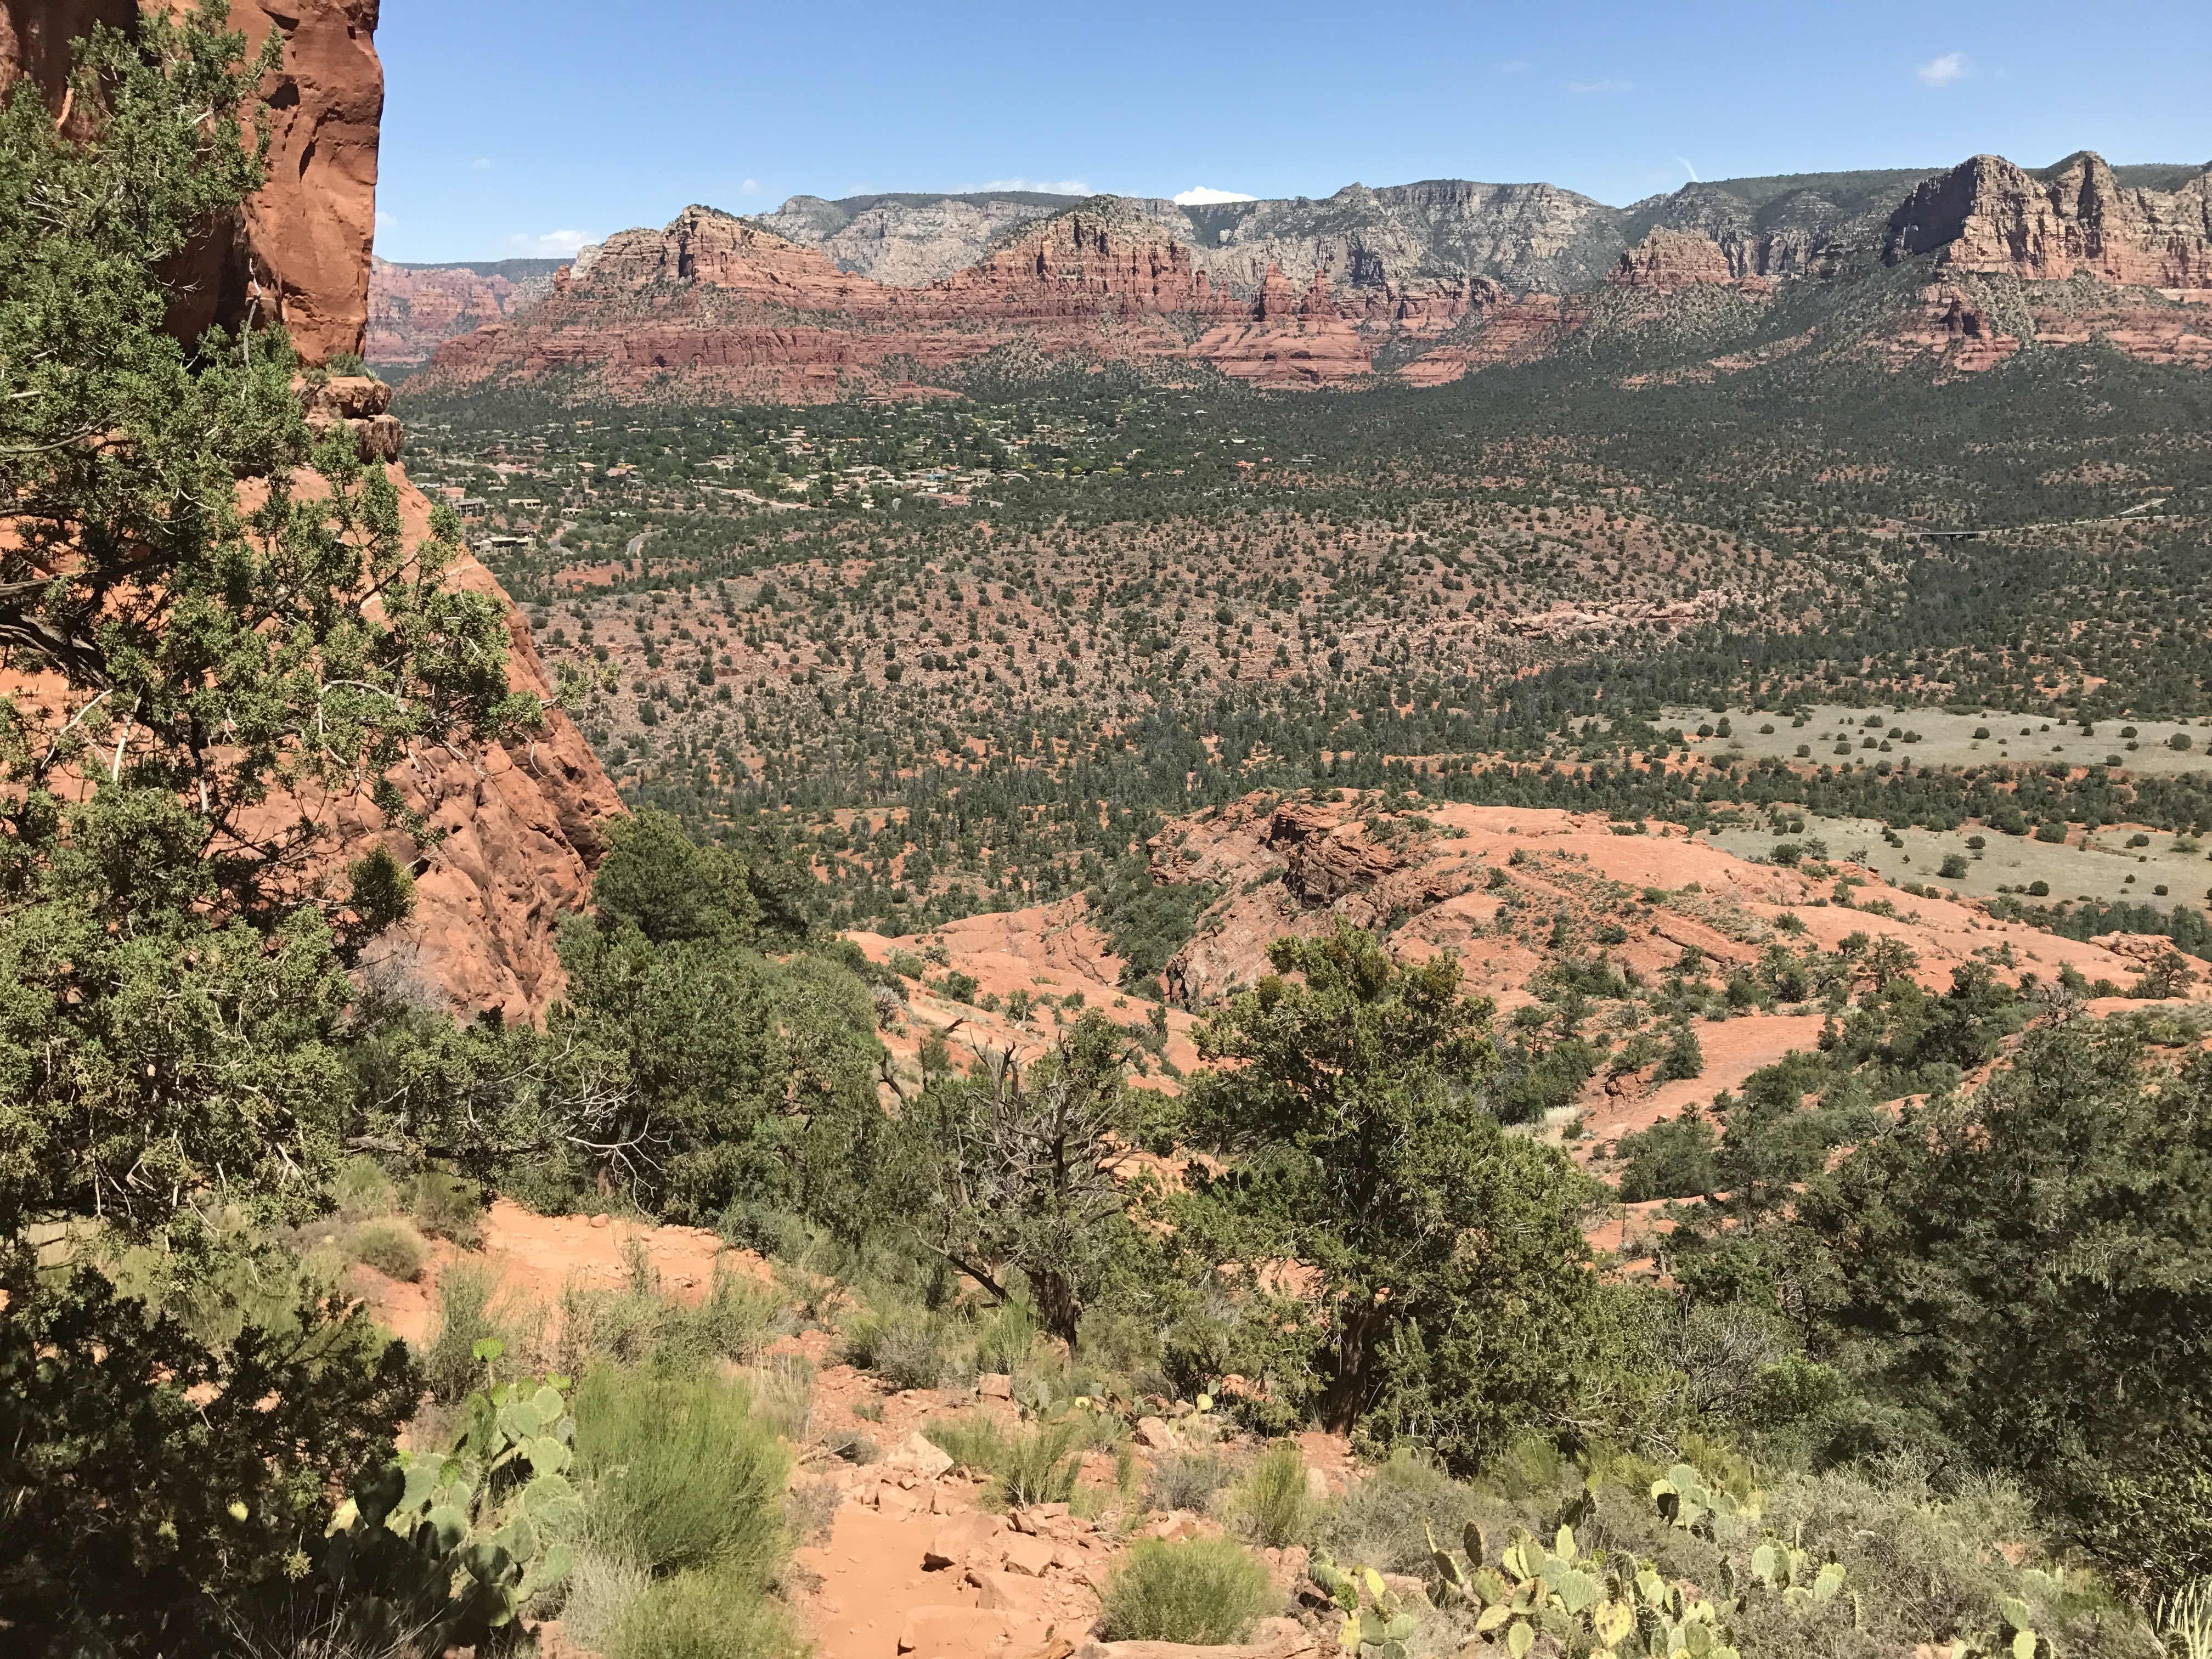 Views from the top of Cathedral Rock Trail. Sedona, AZ - 2017.04.28